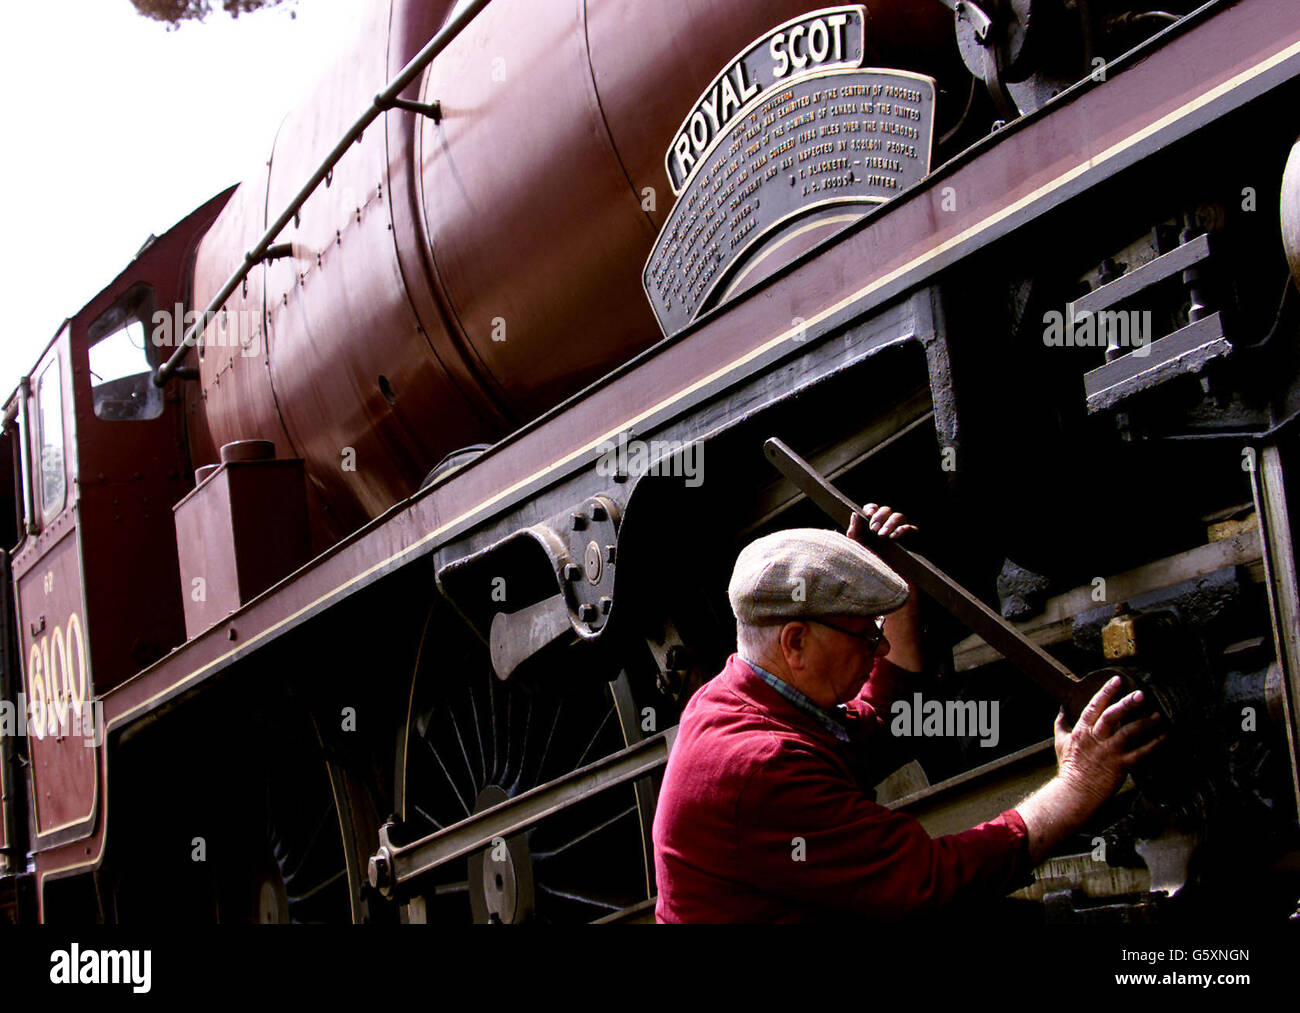 Train engineer Roger Garnham works on dismantling the steam locomotive Royal Scot at the Bressingham Steam Museum at Diss, Norfolk, where it is being overhauled thanks to a 339,000 heritage lottery cash grant. * The locomotive, built in 1927 at a cost of 7, 740, was the first of 71 Elite class 4-6-0 engines providing high speed transport between Euston, Manchester, Liverpool, Carlisle and Glasgow. The locomotive will be restored to full working order within four years. Stock Photo